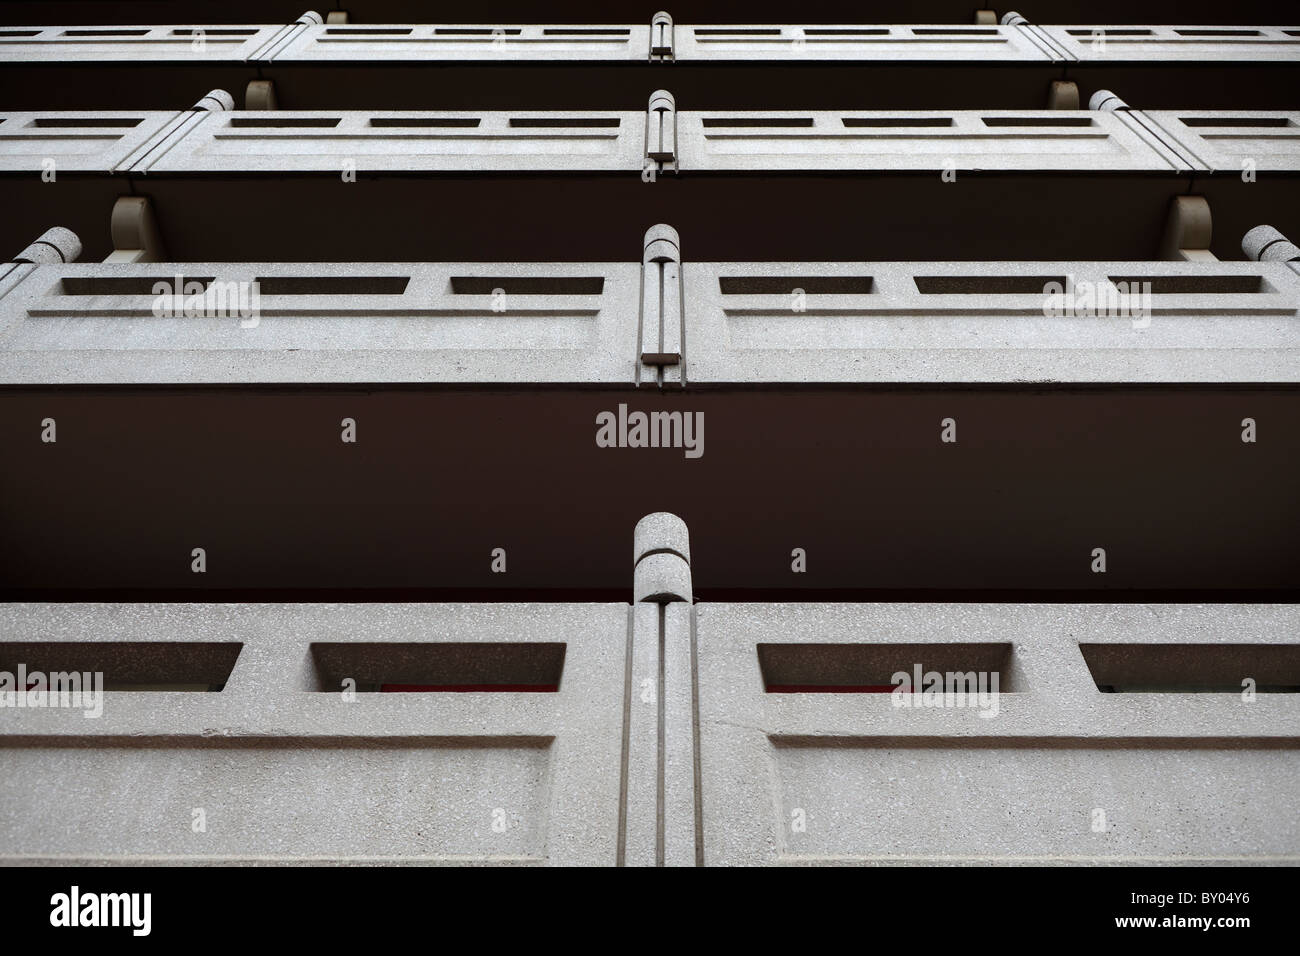 Four levels of balconies on the exterior of an apartment building. Stock Photo